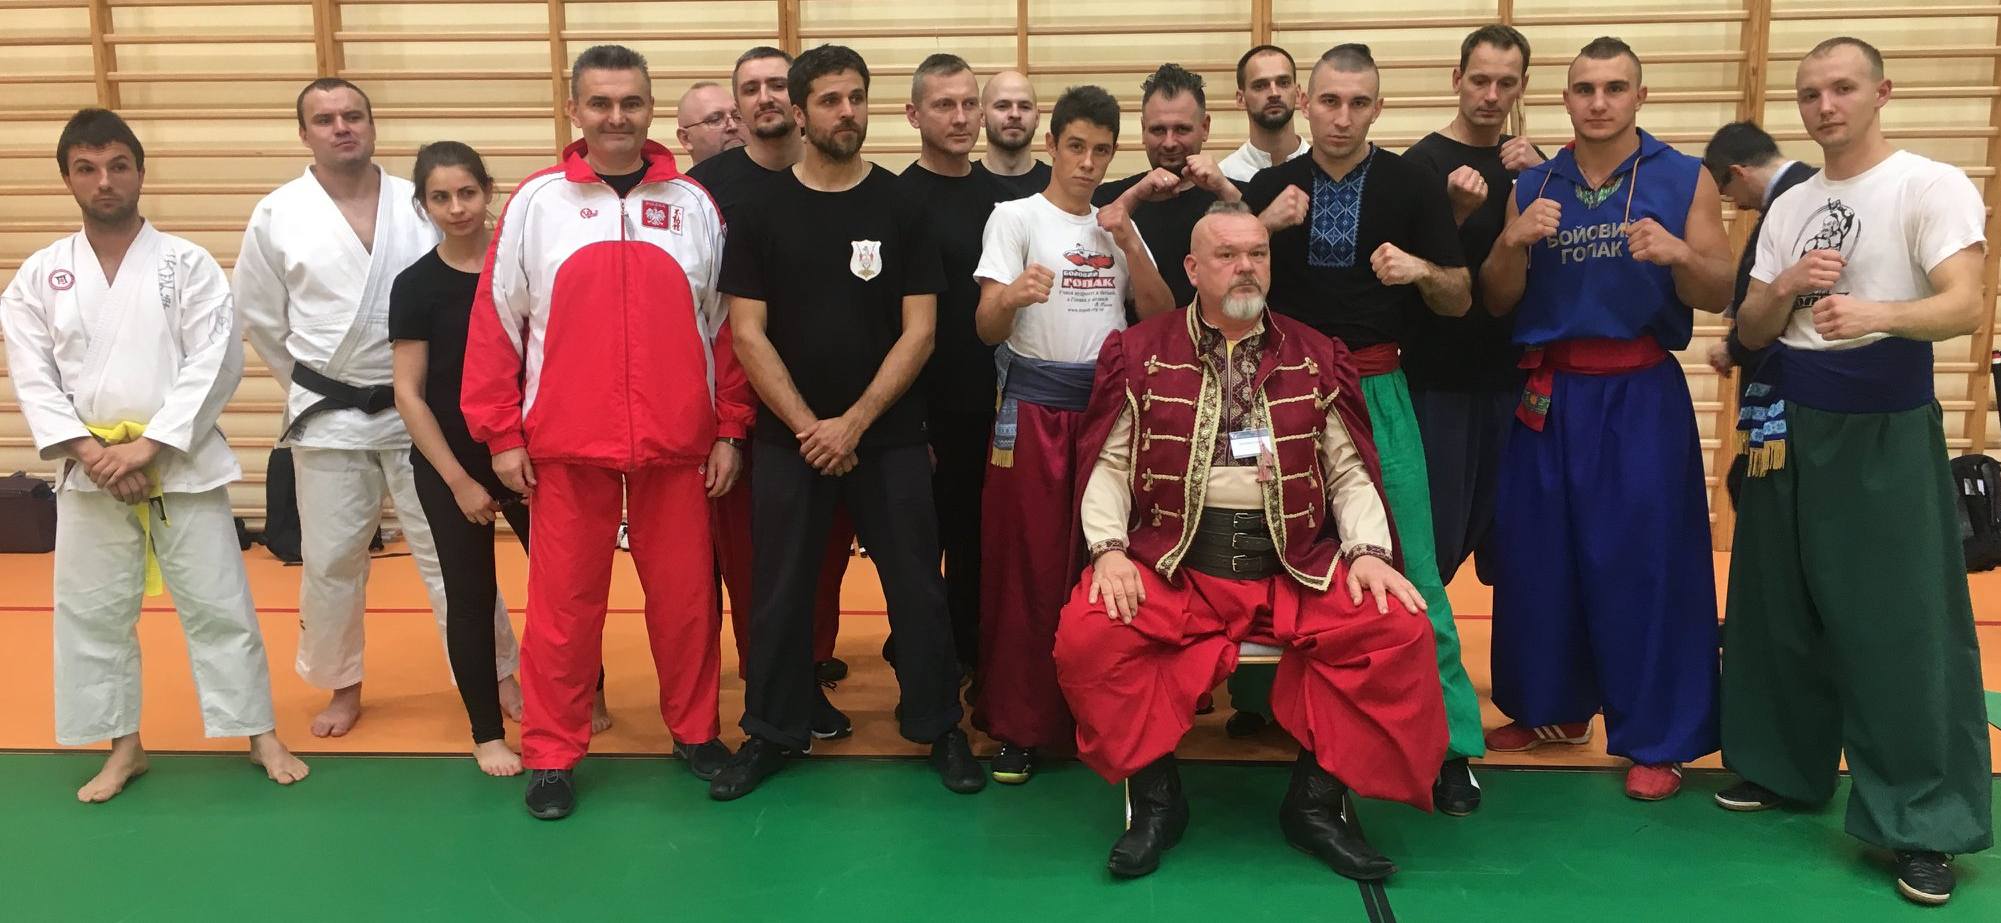 *** 4th World Scientific Congress of Combat Sports and Martial Arts — Workshop 2018-10-17-19 Rzeszow ***